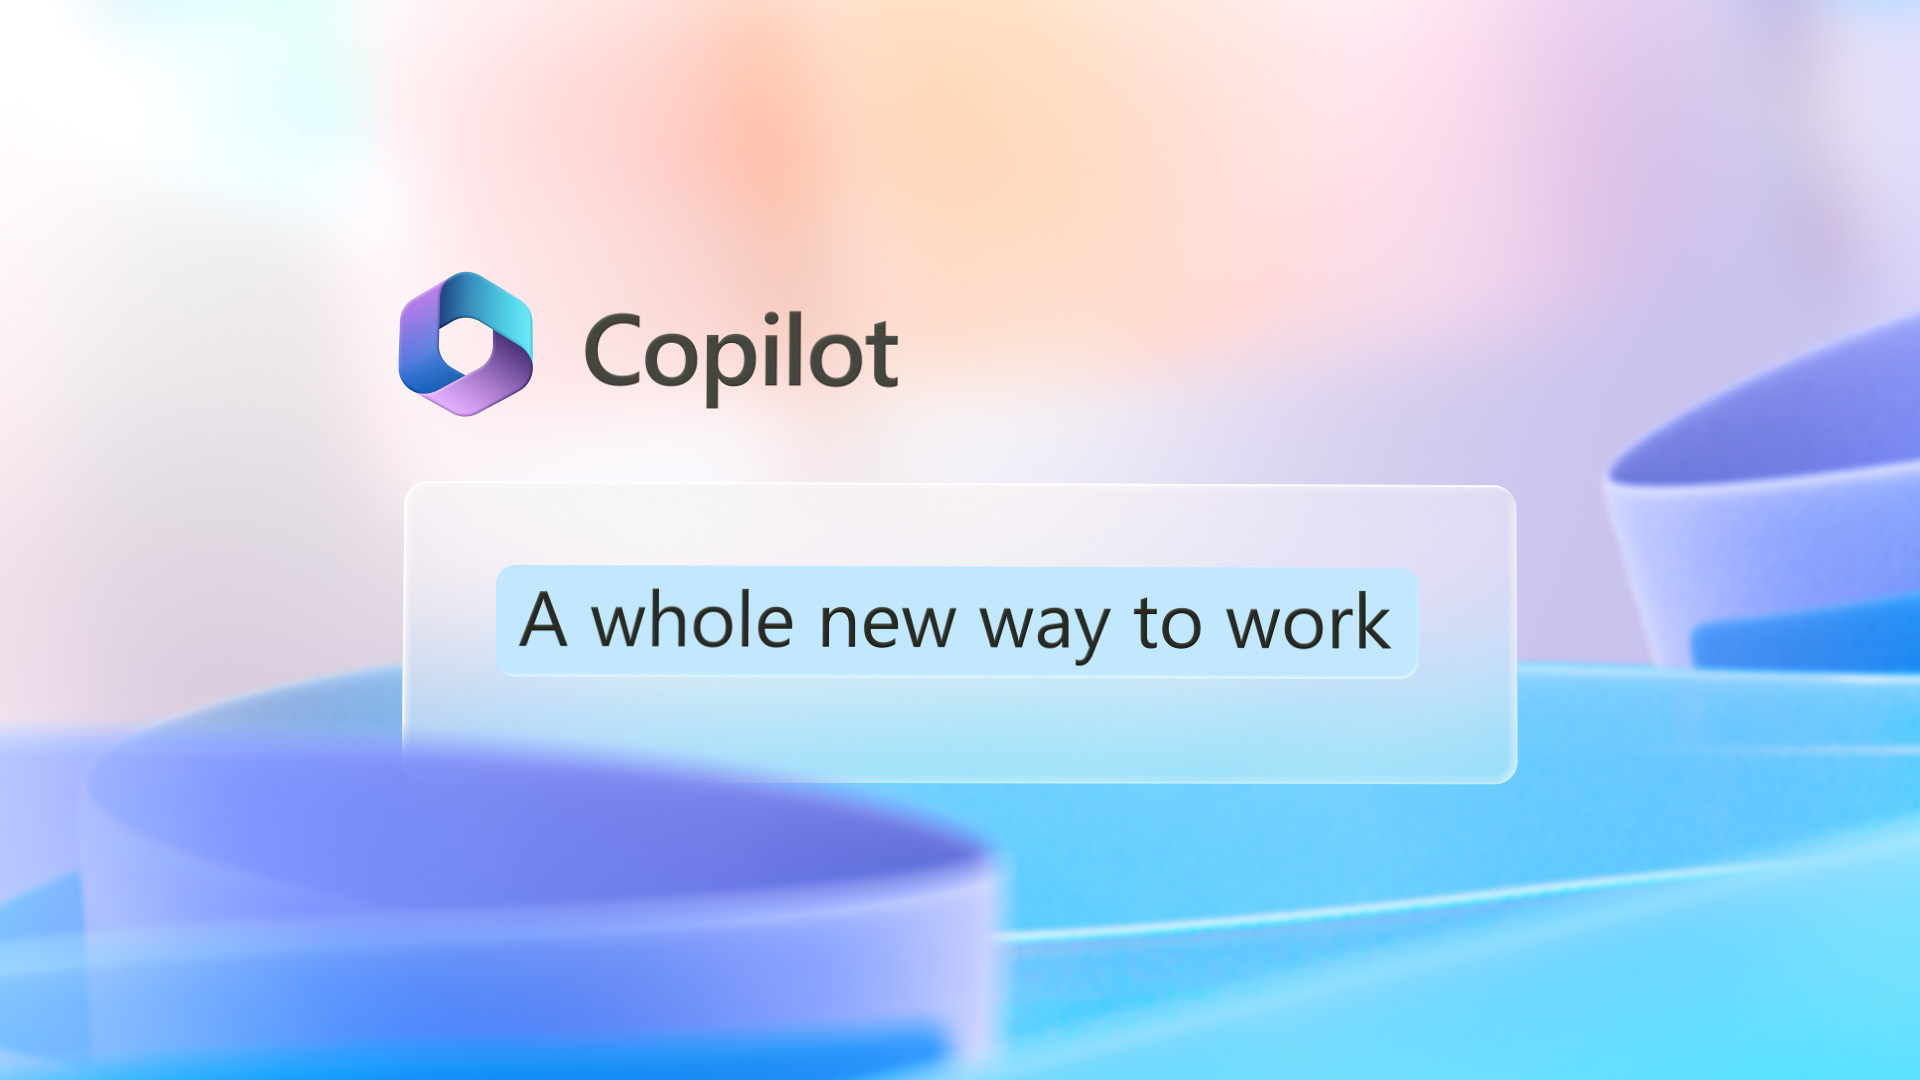 DoNotSpy11 can now turn off Windows Copilot and other tracking features